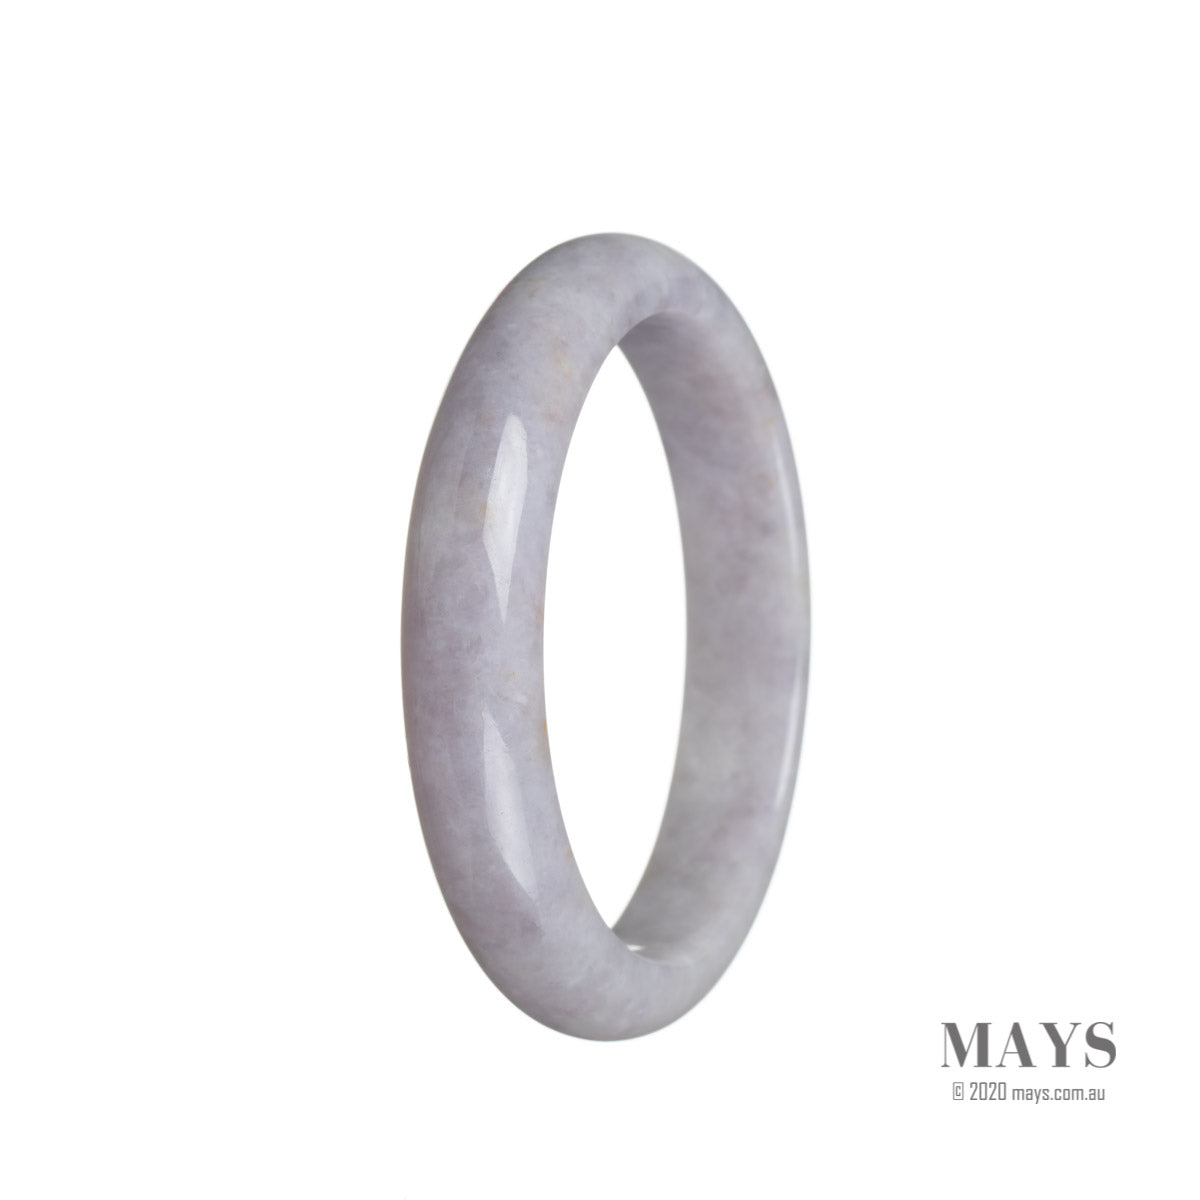 A lavender jade bangle bracelet with a semi-round shape, crafted from real natural jadeite.